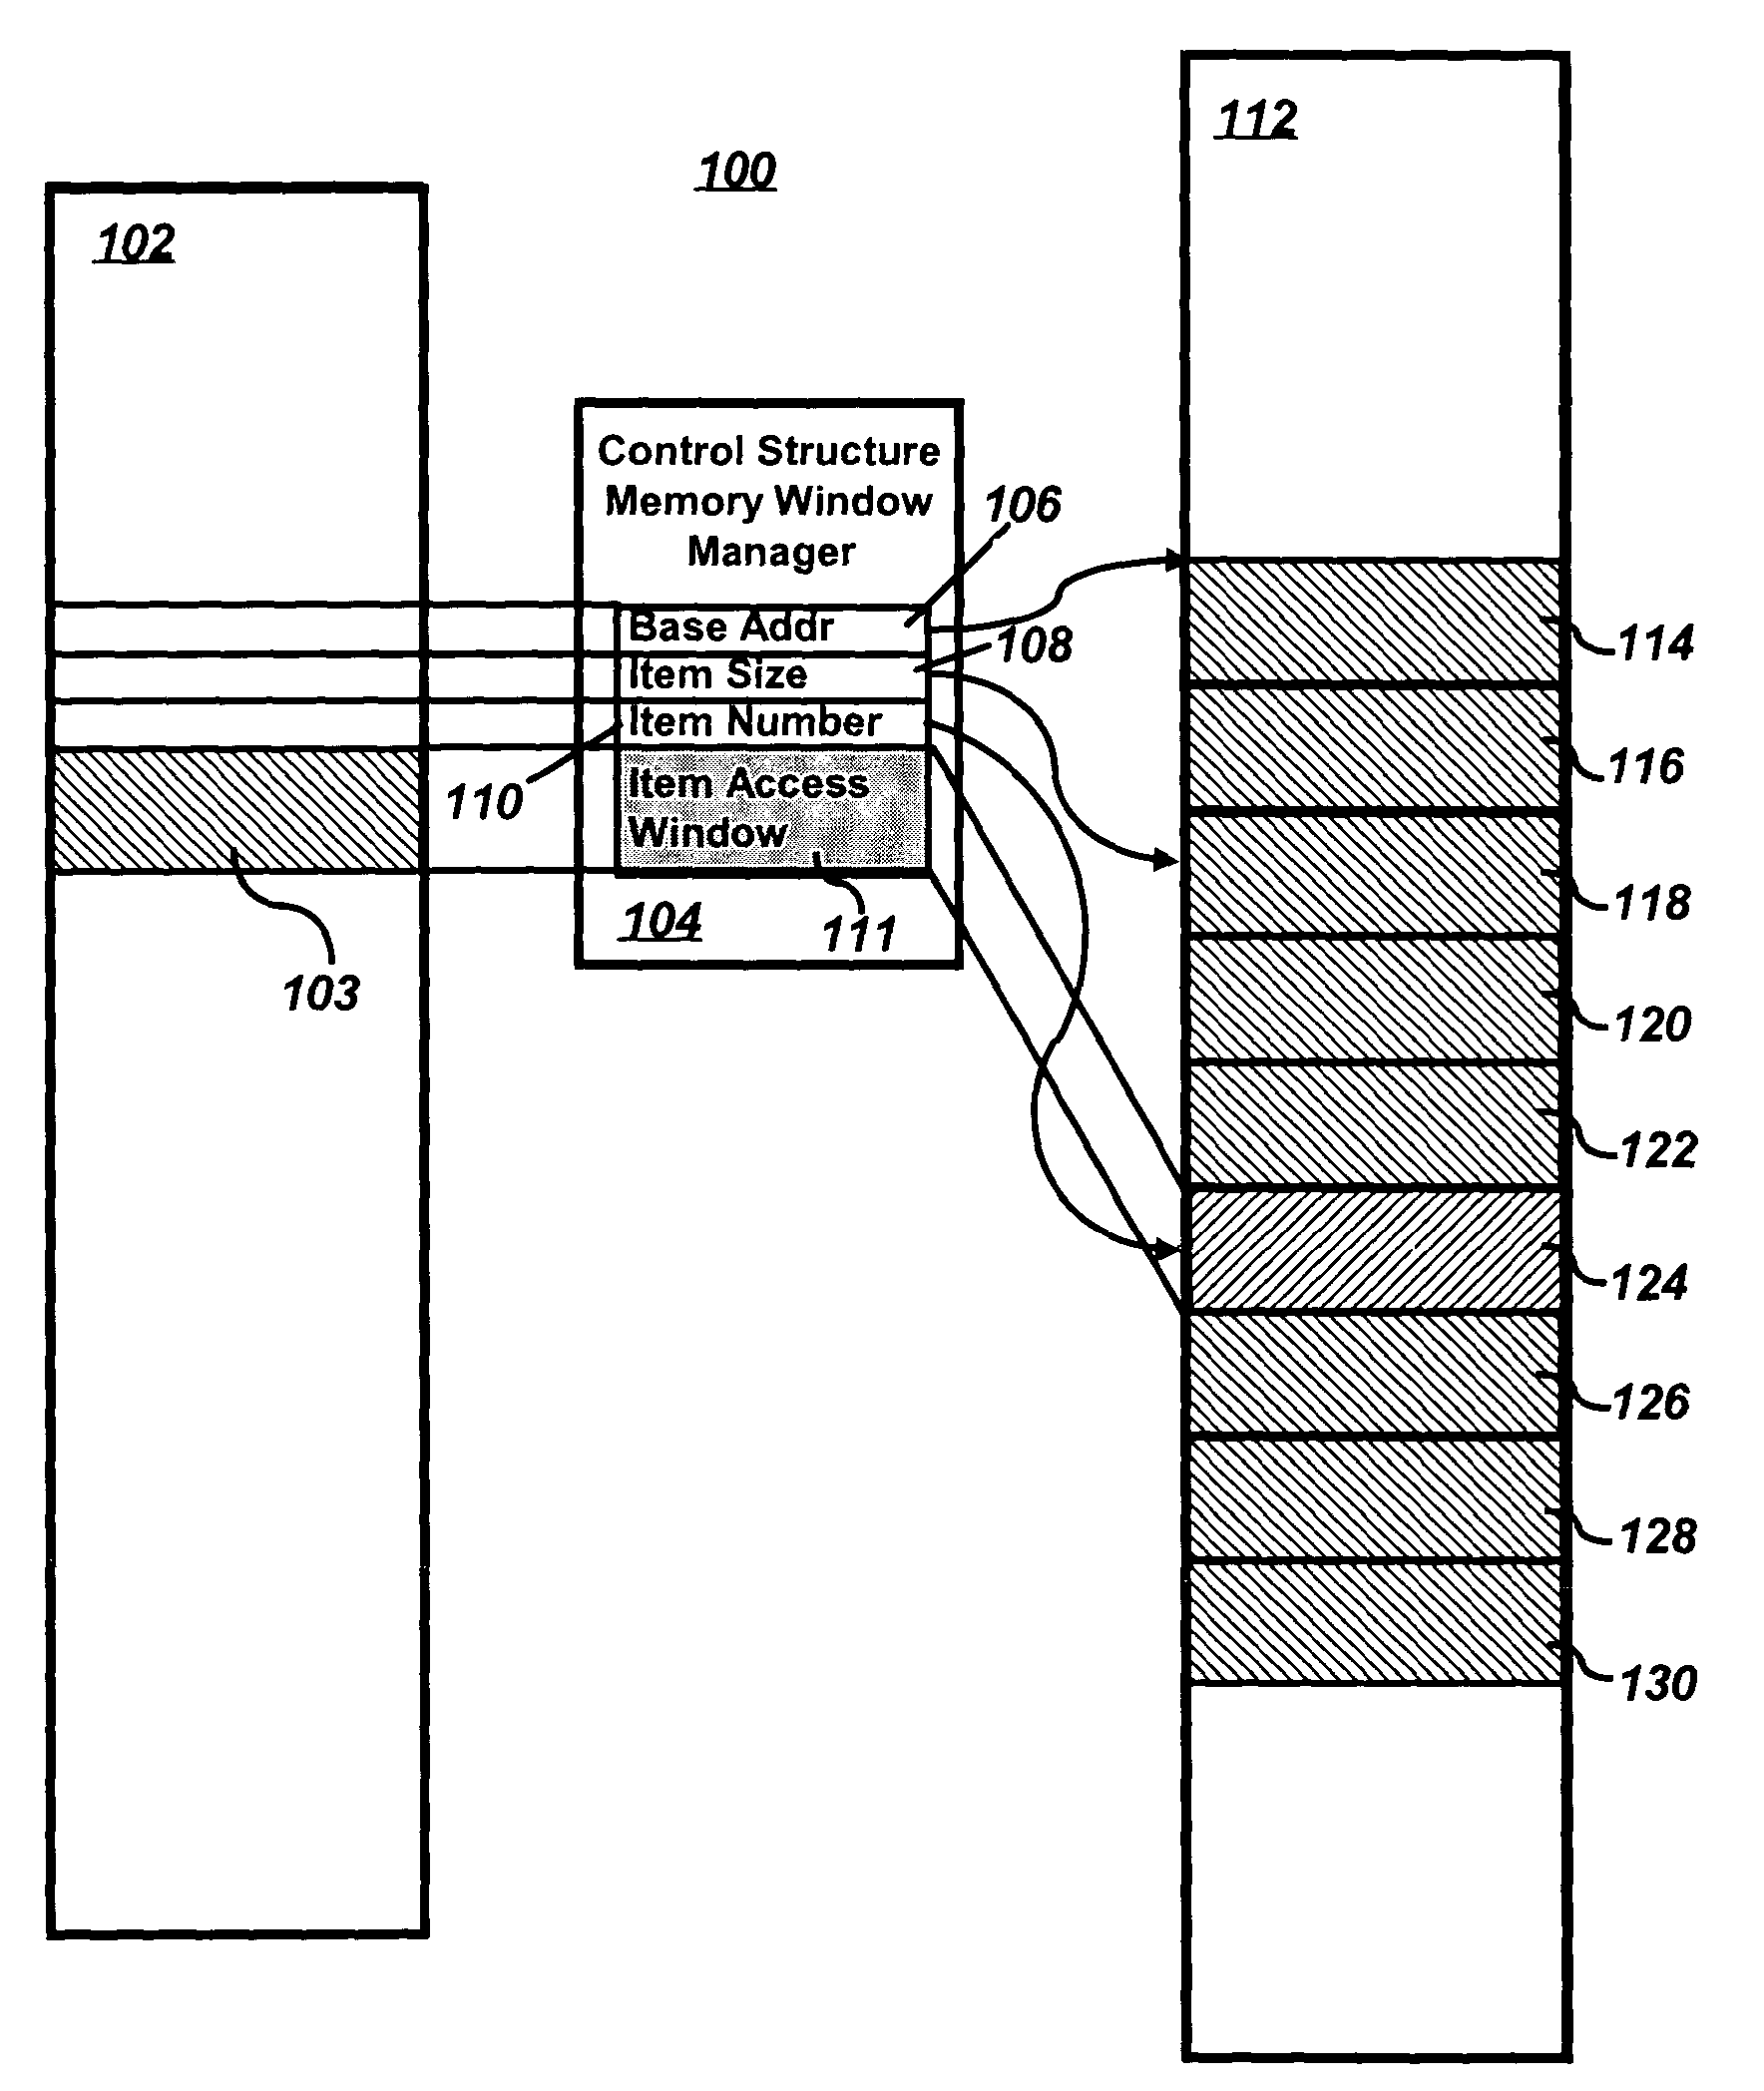 Memory window manager for control structure access